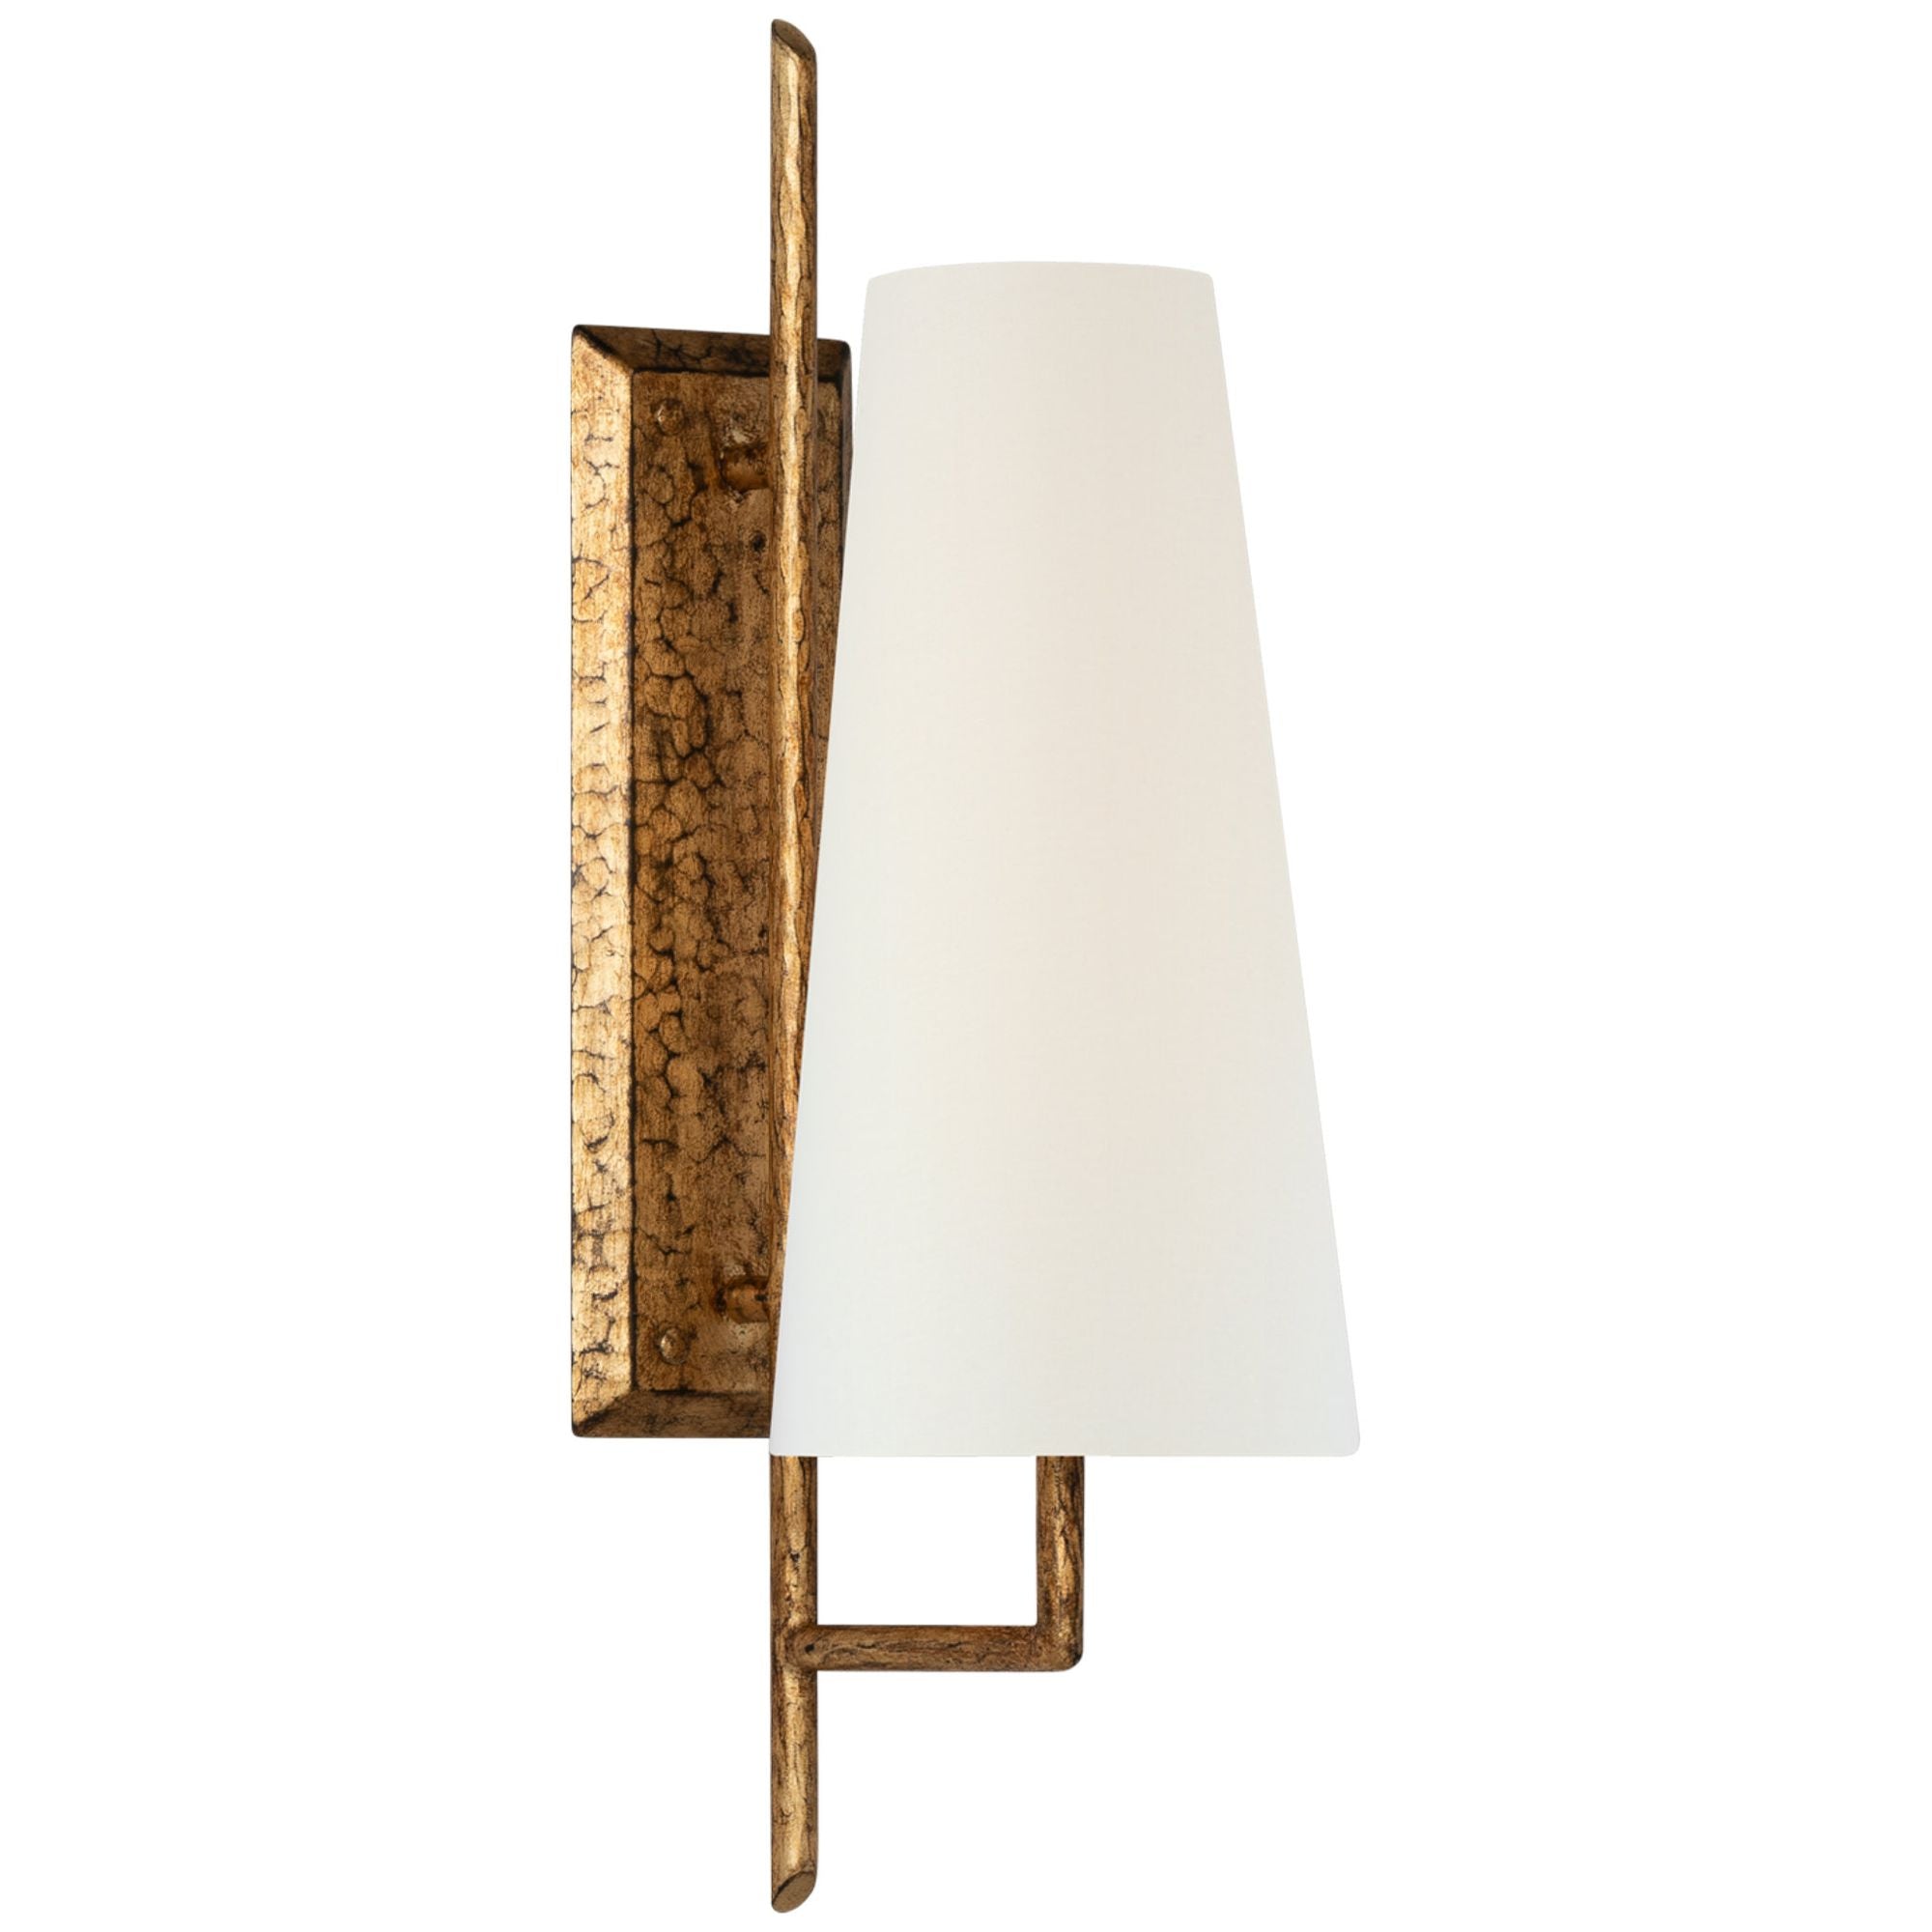 Chapman & Myers Ashton Large Single Sculpted Sconce in Gilded Iron with Linen Shade